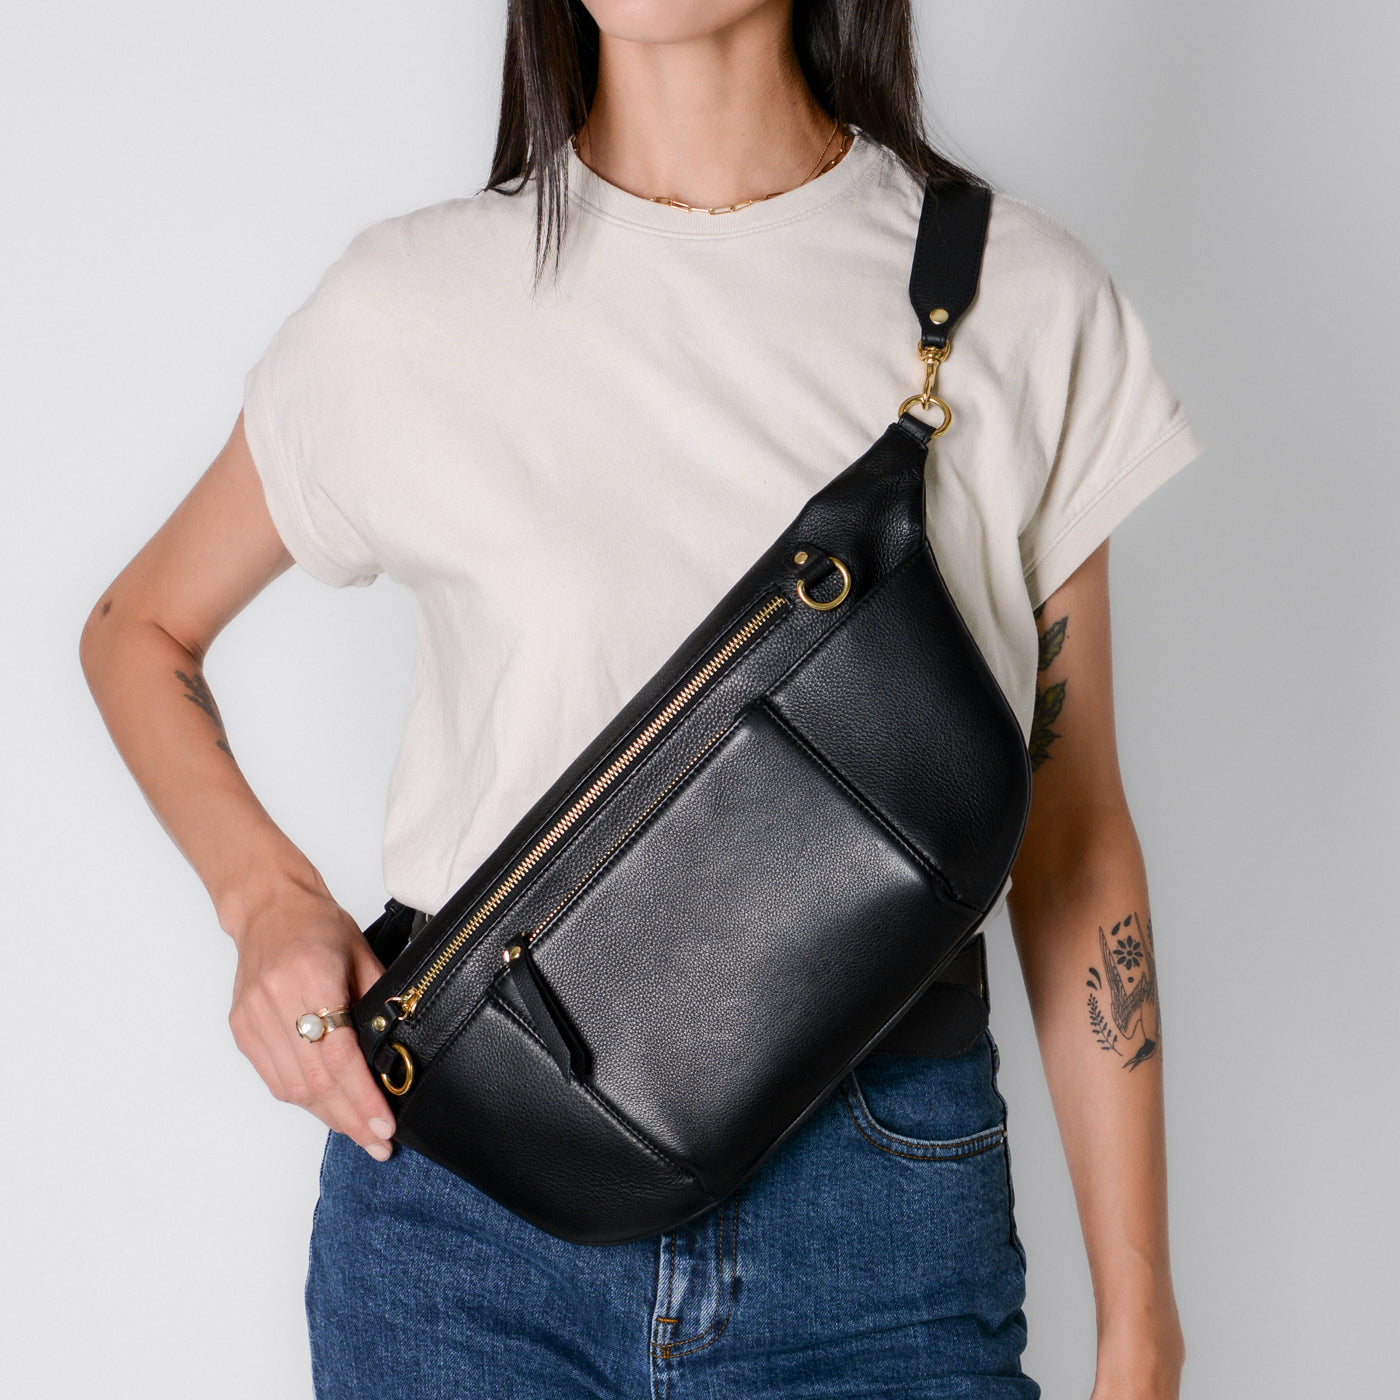 Nomad Fanny Pack